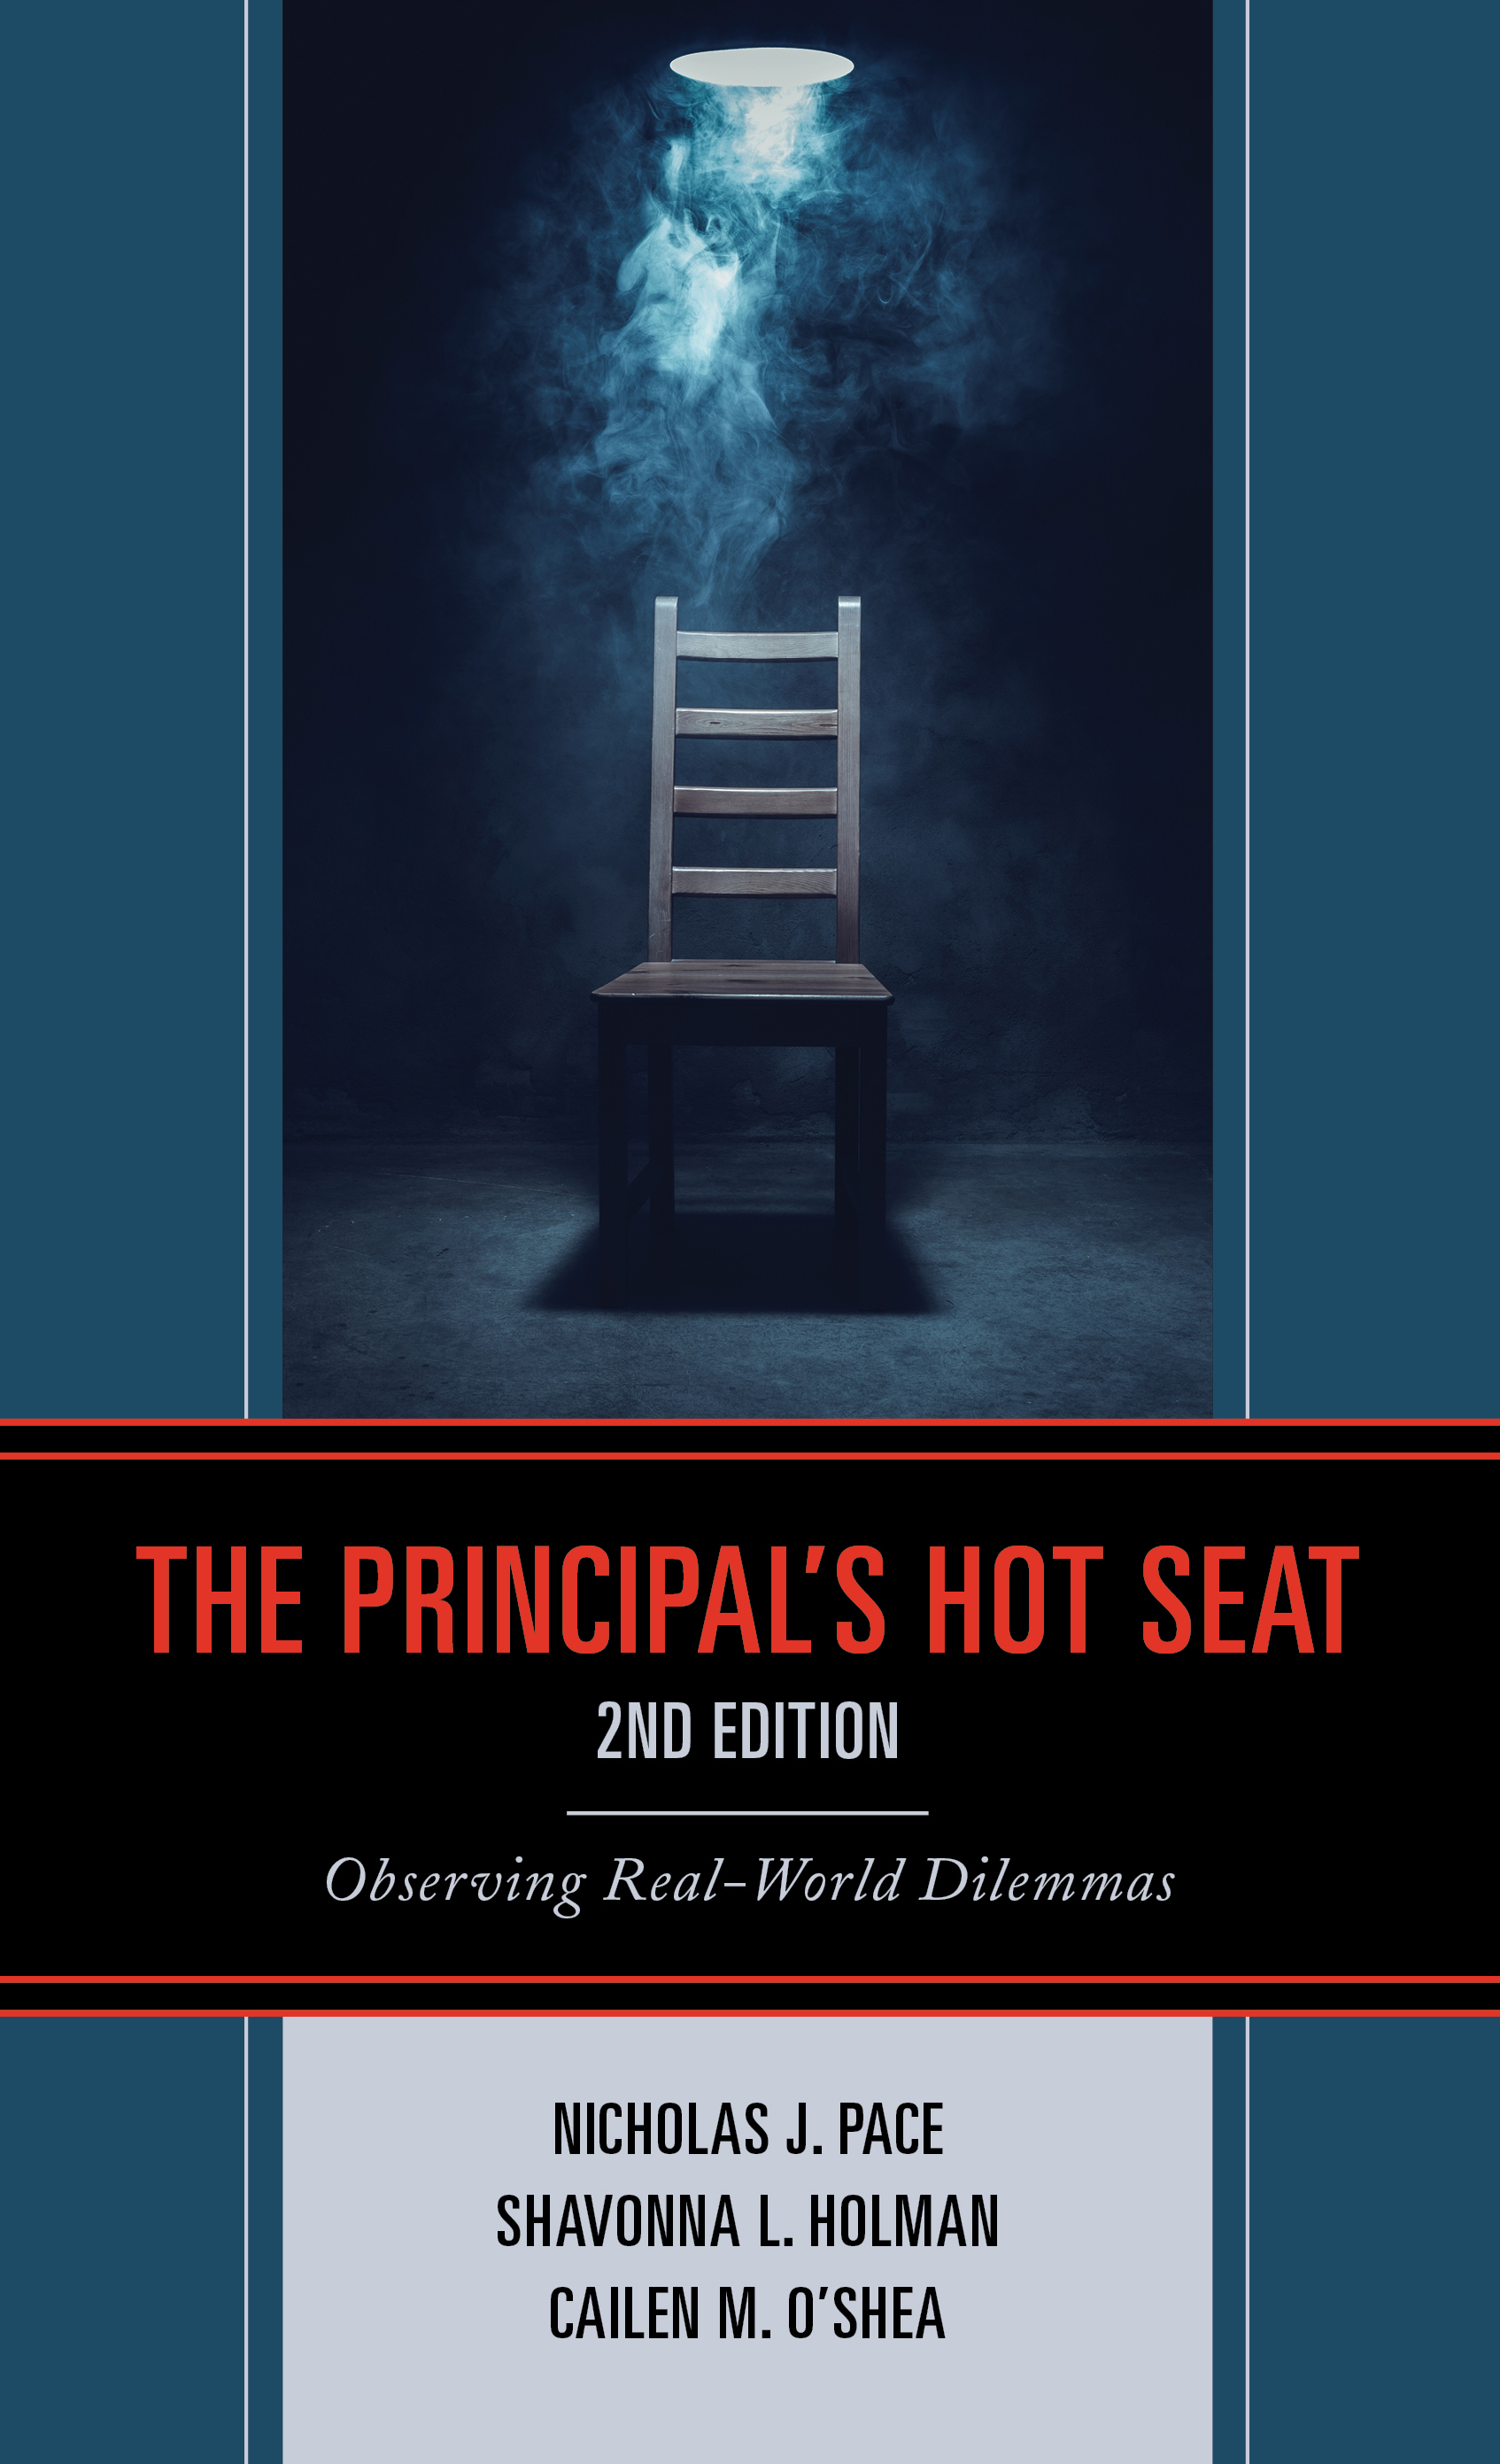 The Principal’s Hot Seat: Observing Real-World Dilemmas